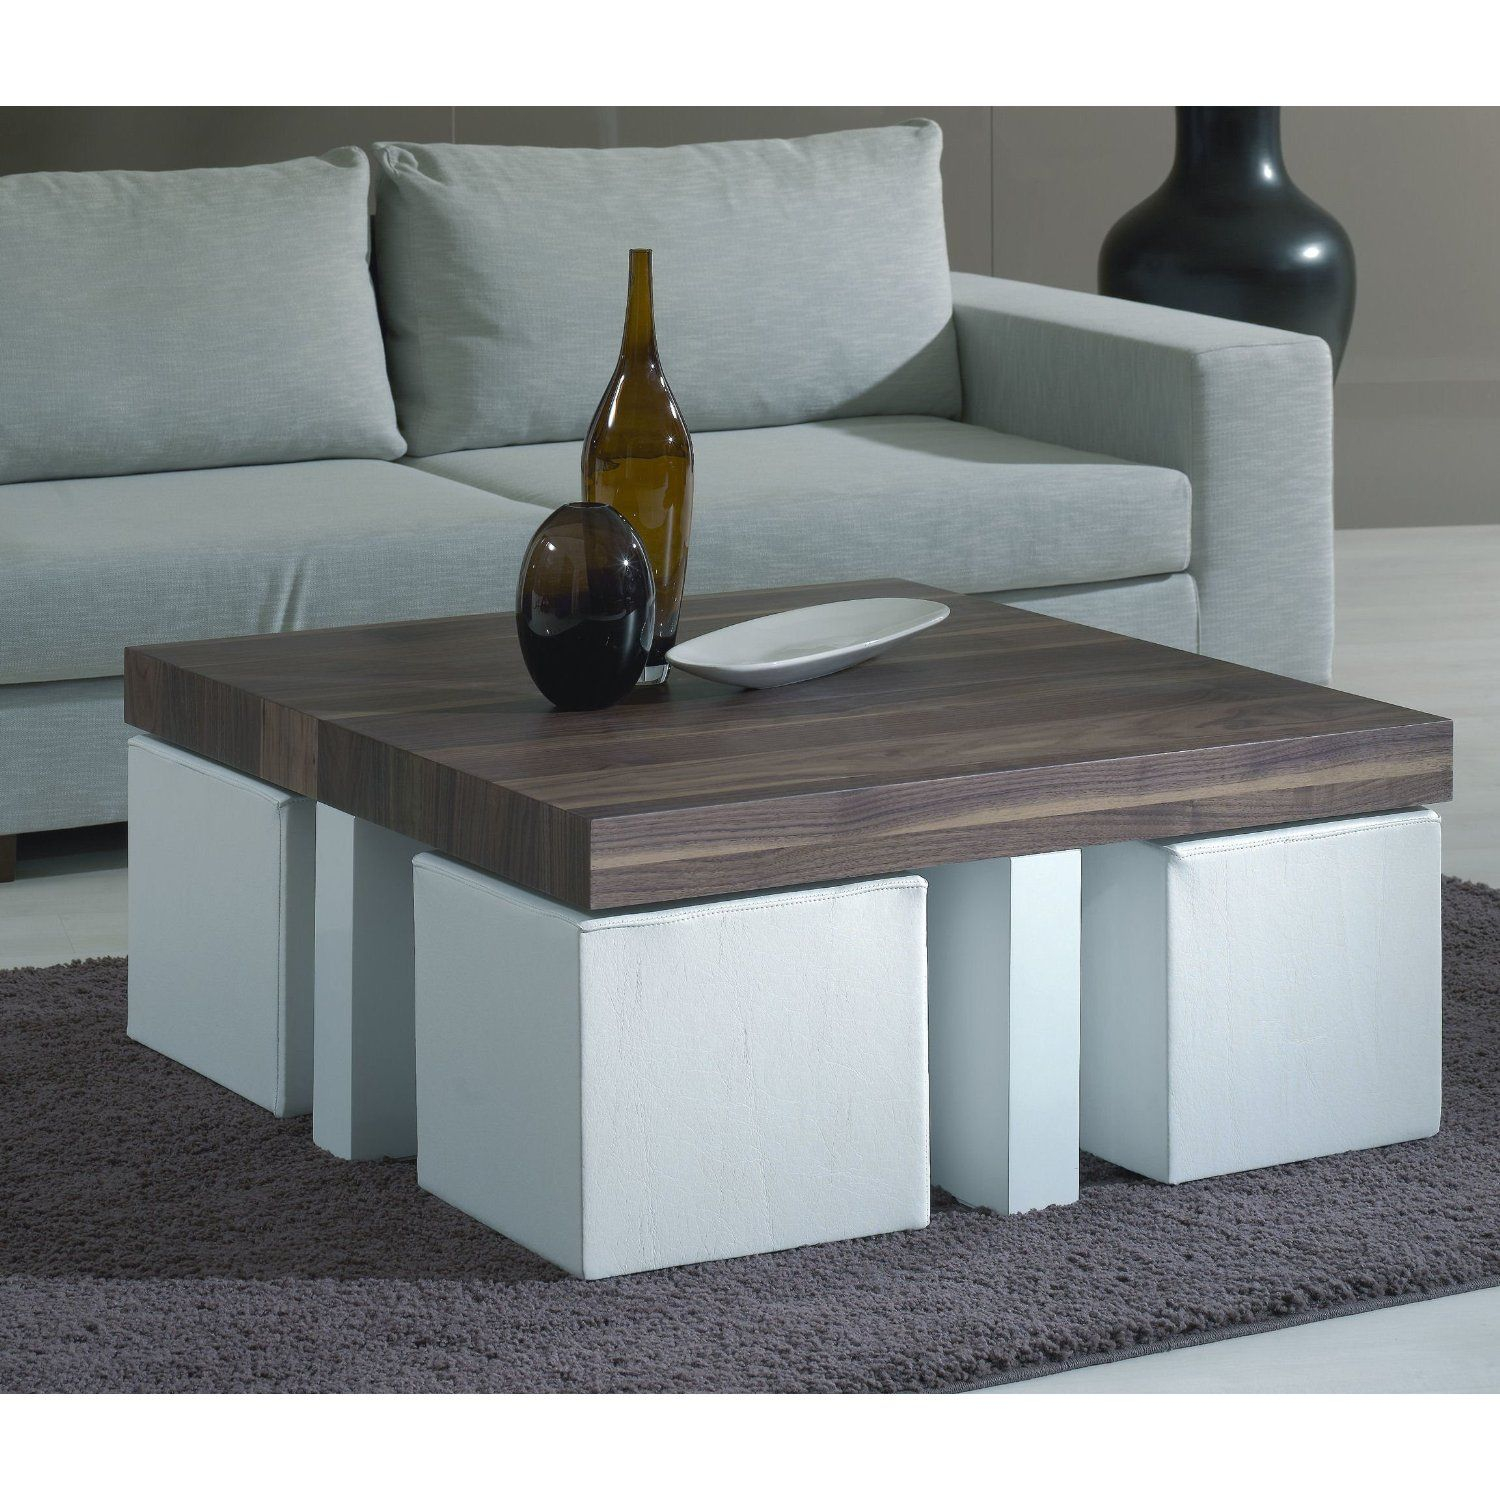 Coffee Table With Stools Love This Idea For Stools Tucked Under A in dimensions 1500 X 1500